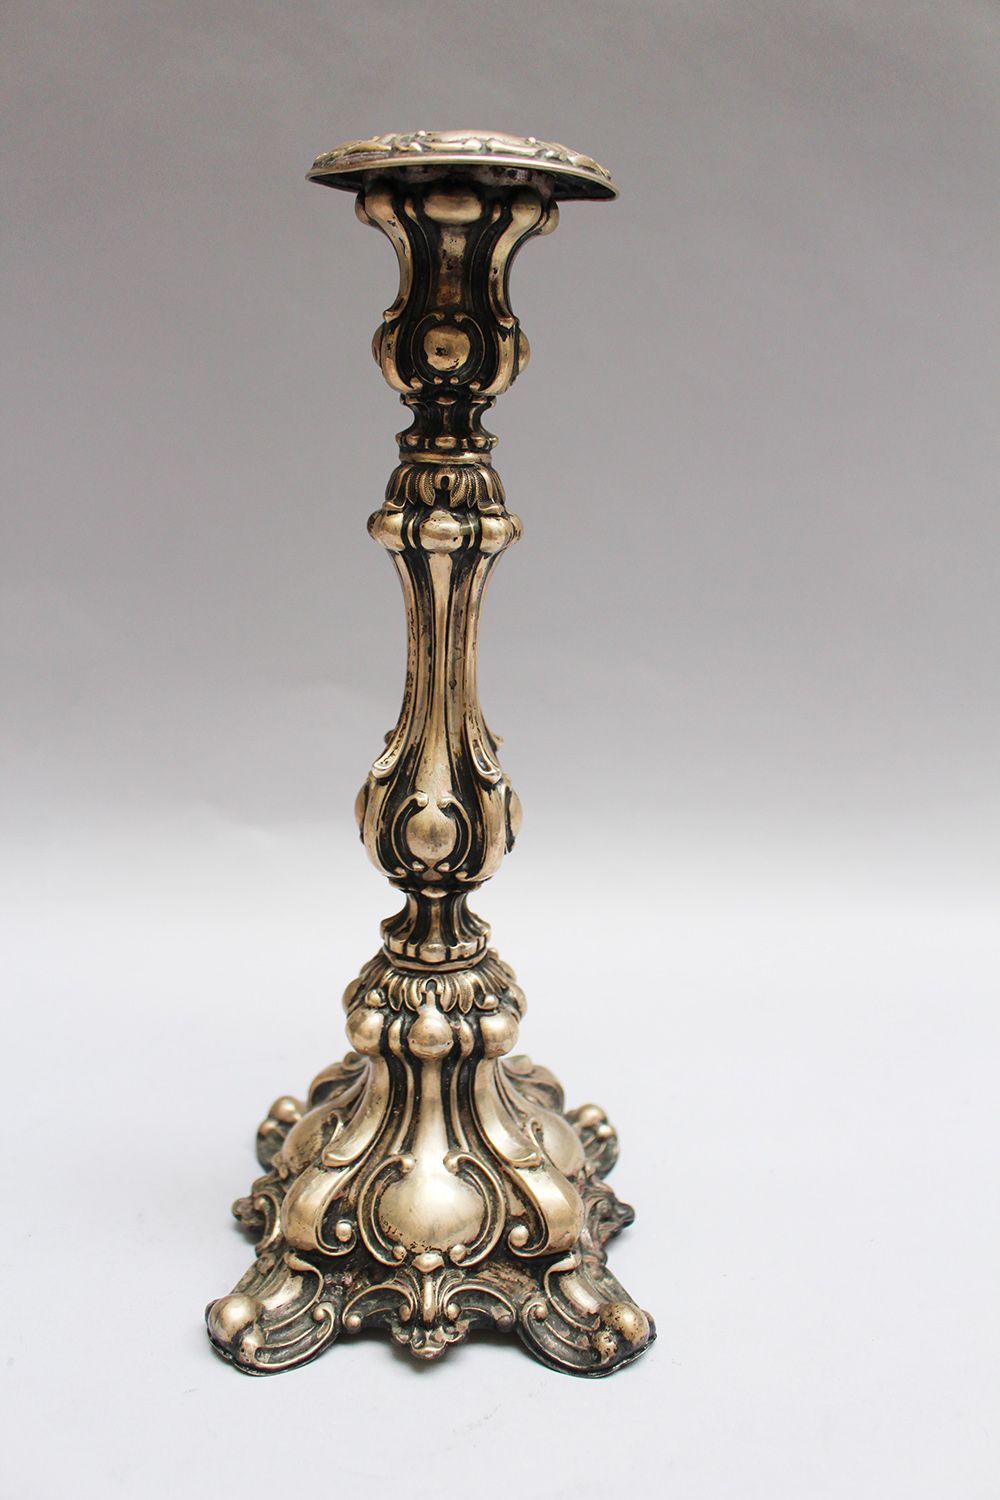 Null Silver candle stick, mid of 19th Century, 12 lötig; 508g. 29Cm height